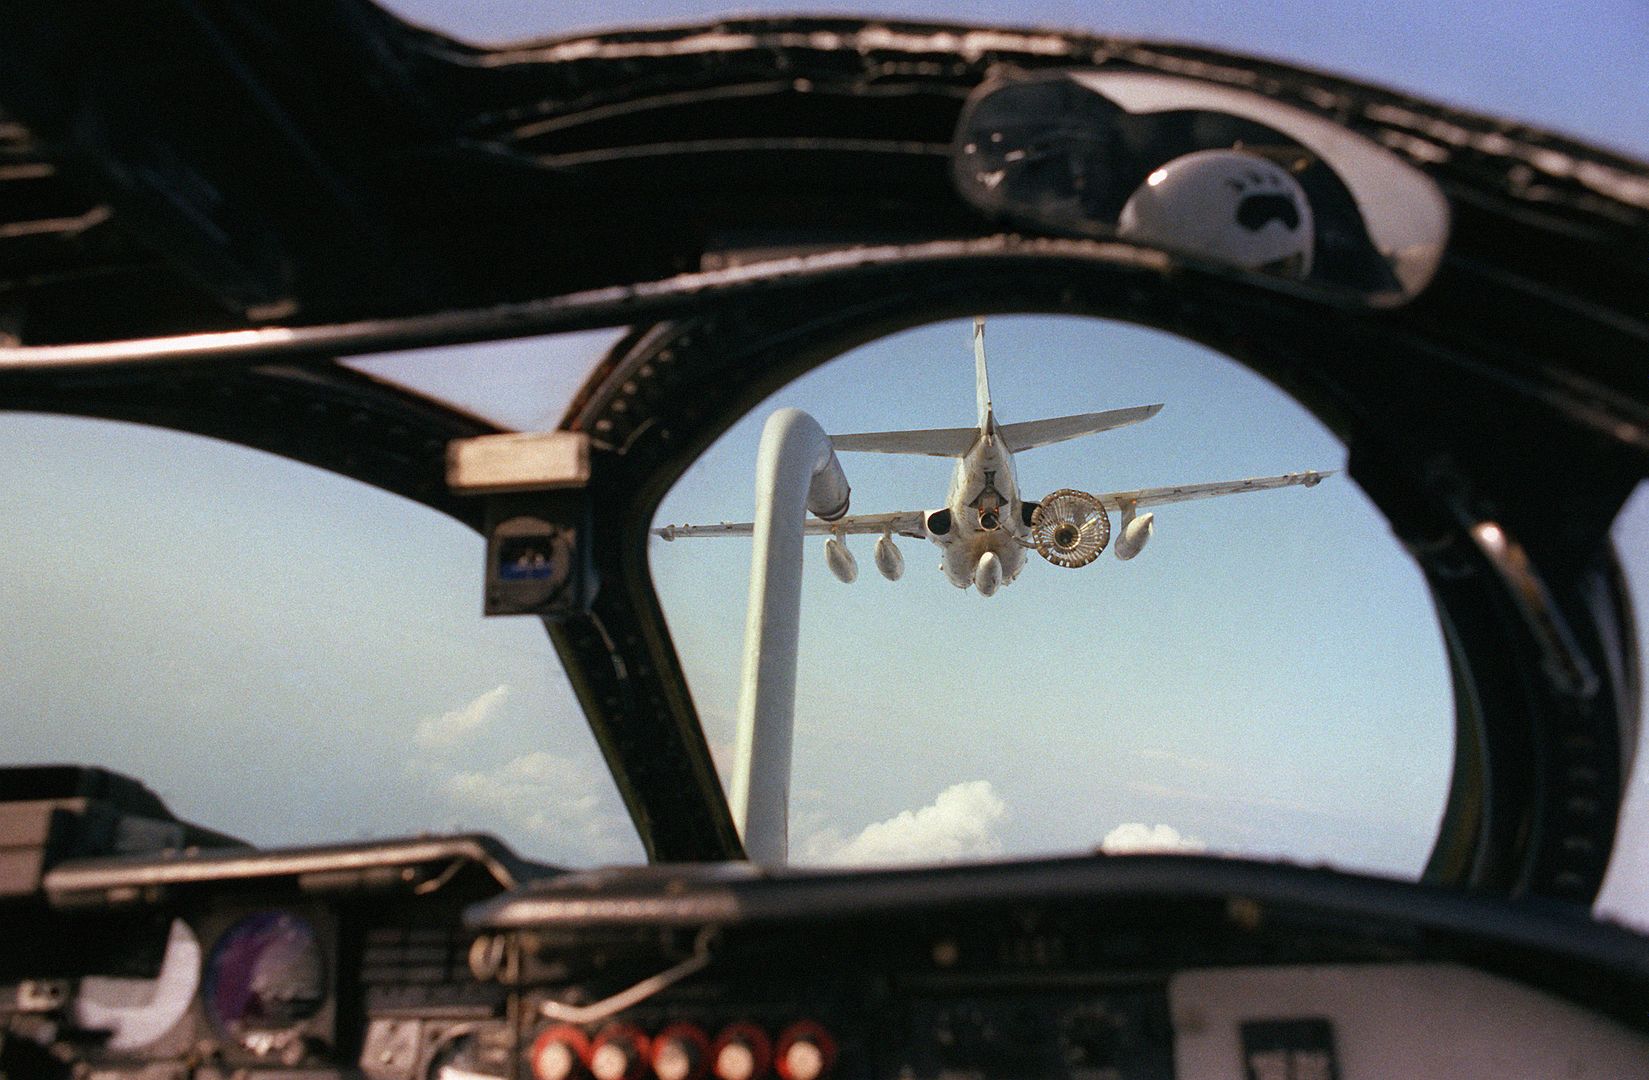 A View From The Cockpit Of A A 6E Intruder Aircraft As It Approaches A KA 6D Intruder Aircraft For Aerial Refueling